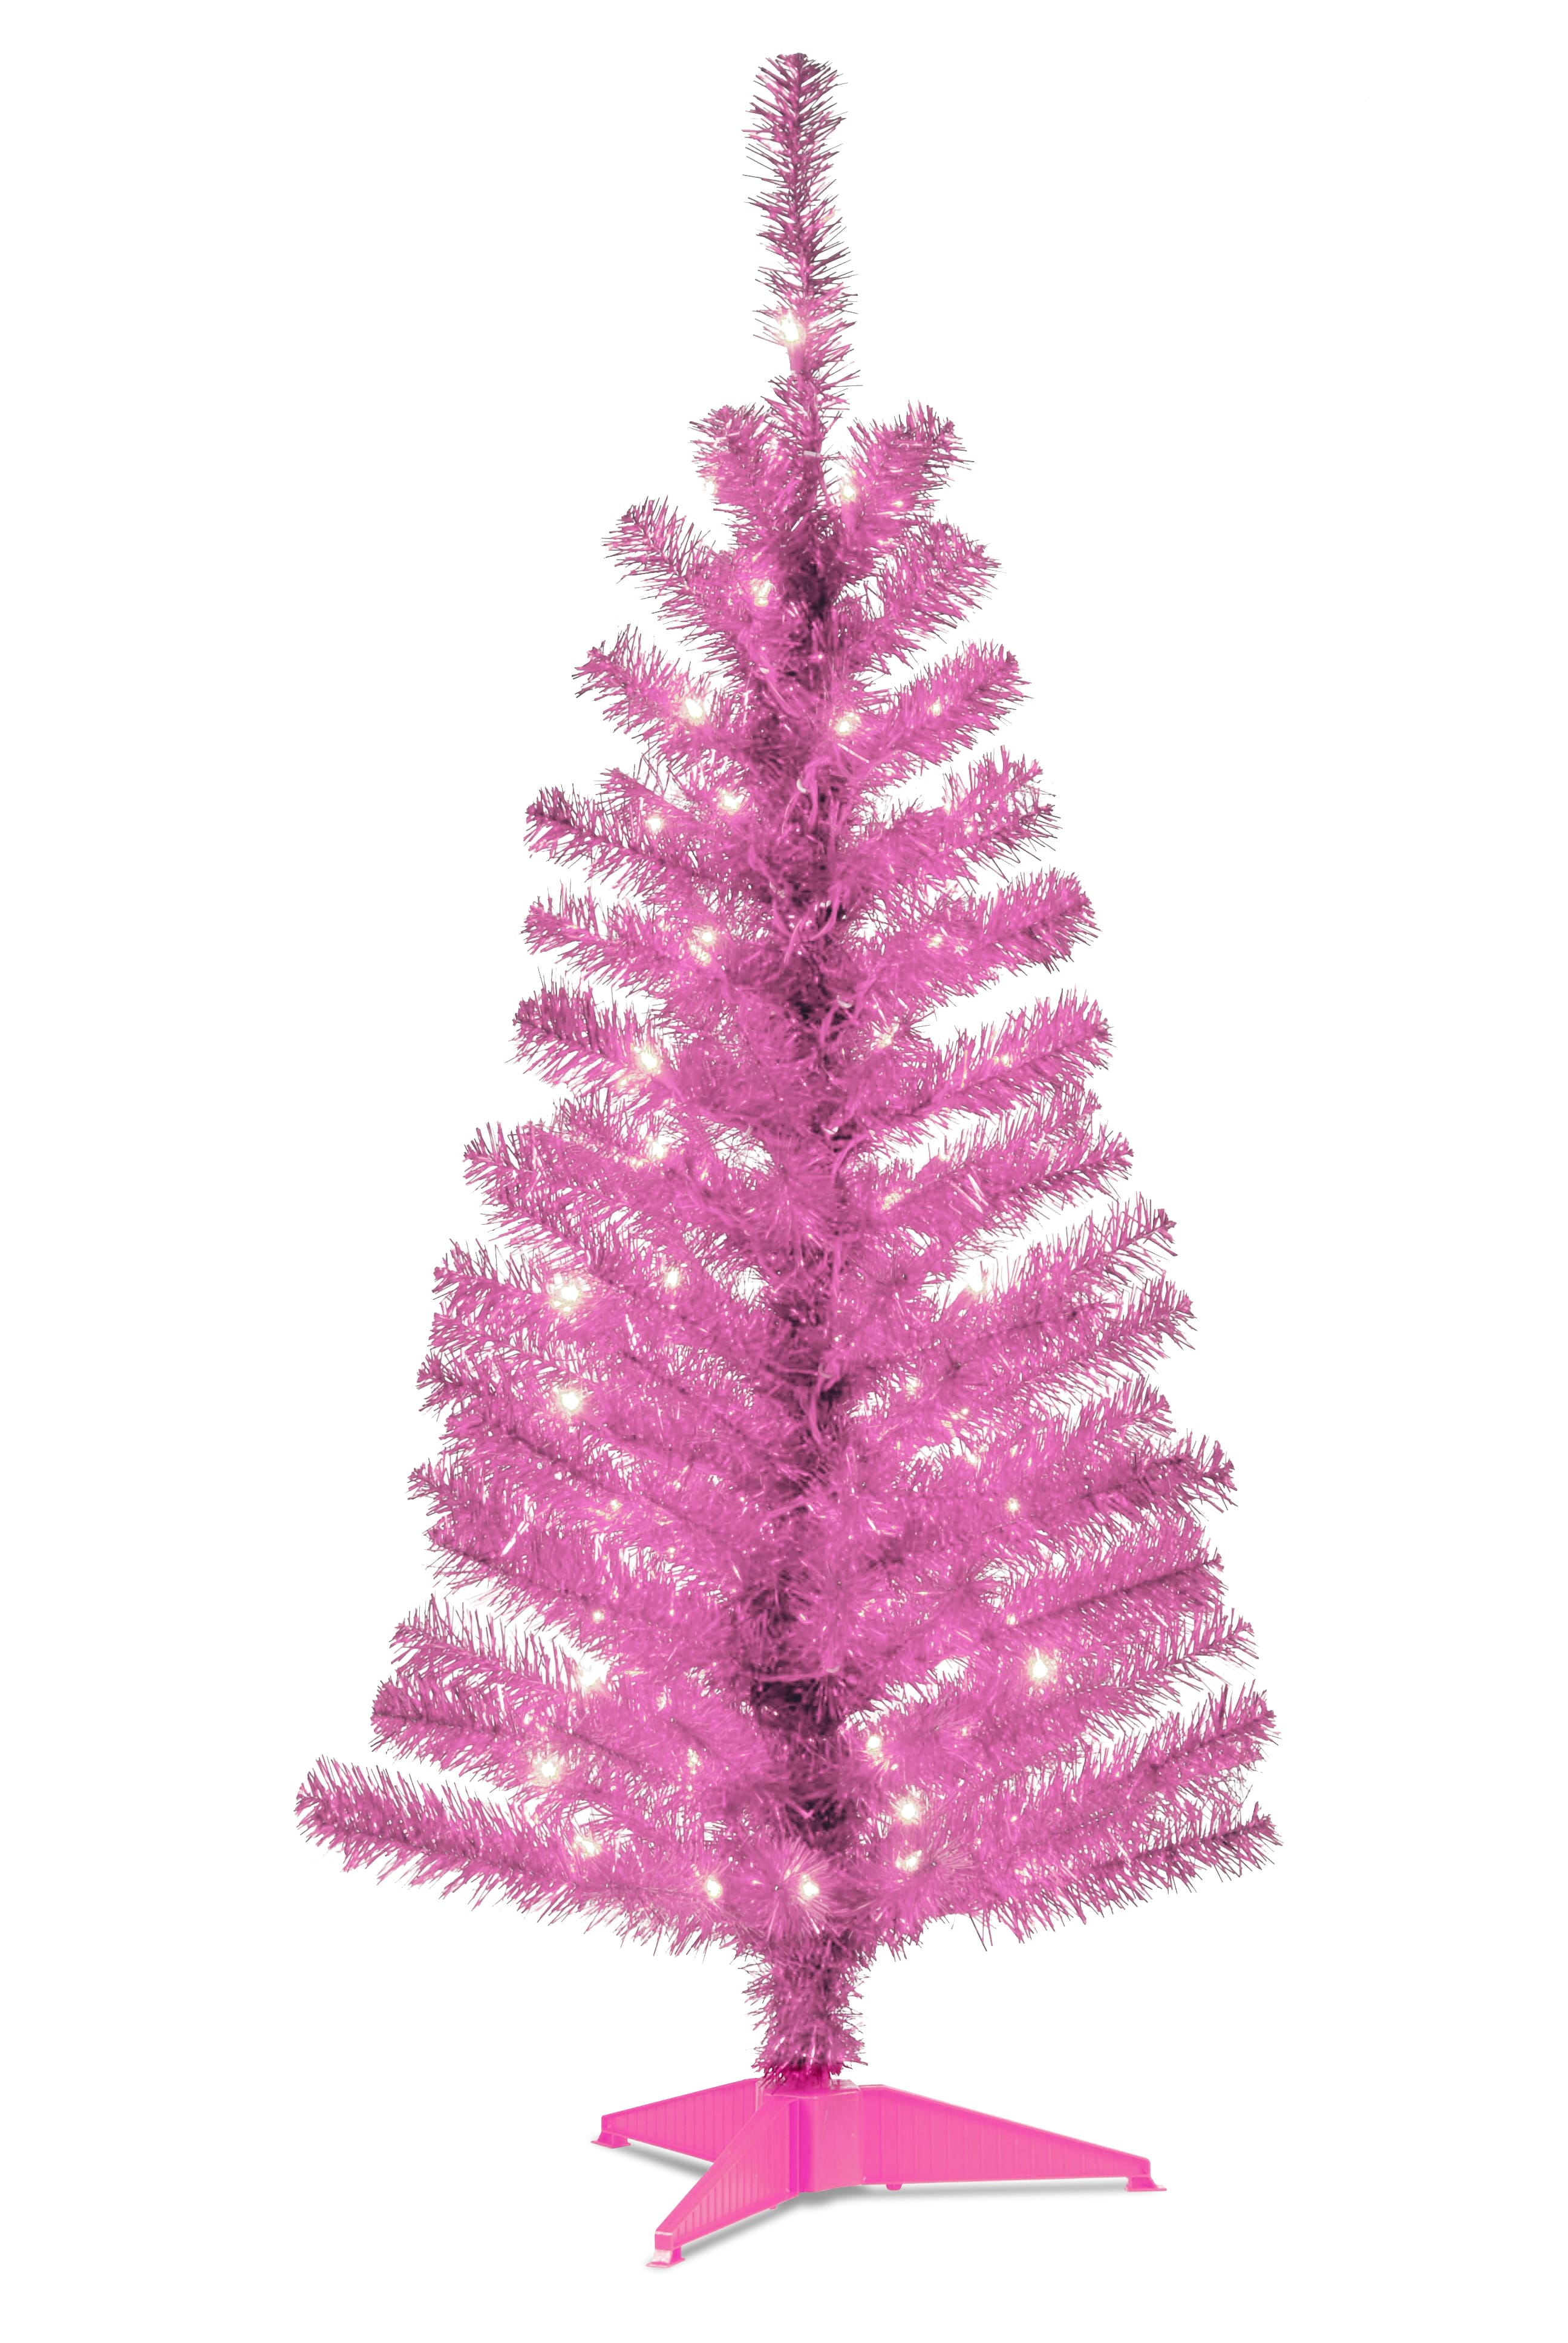 2 FT PINK PRE LIT DECORATED  CHRISTMAS TREE LIGHTS  ORNAMENTS NEW 